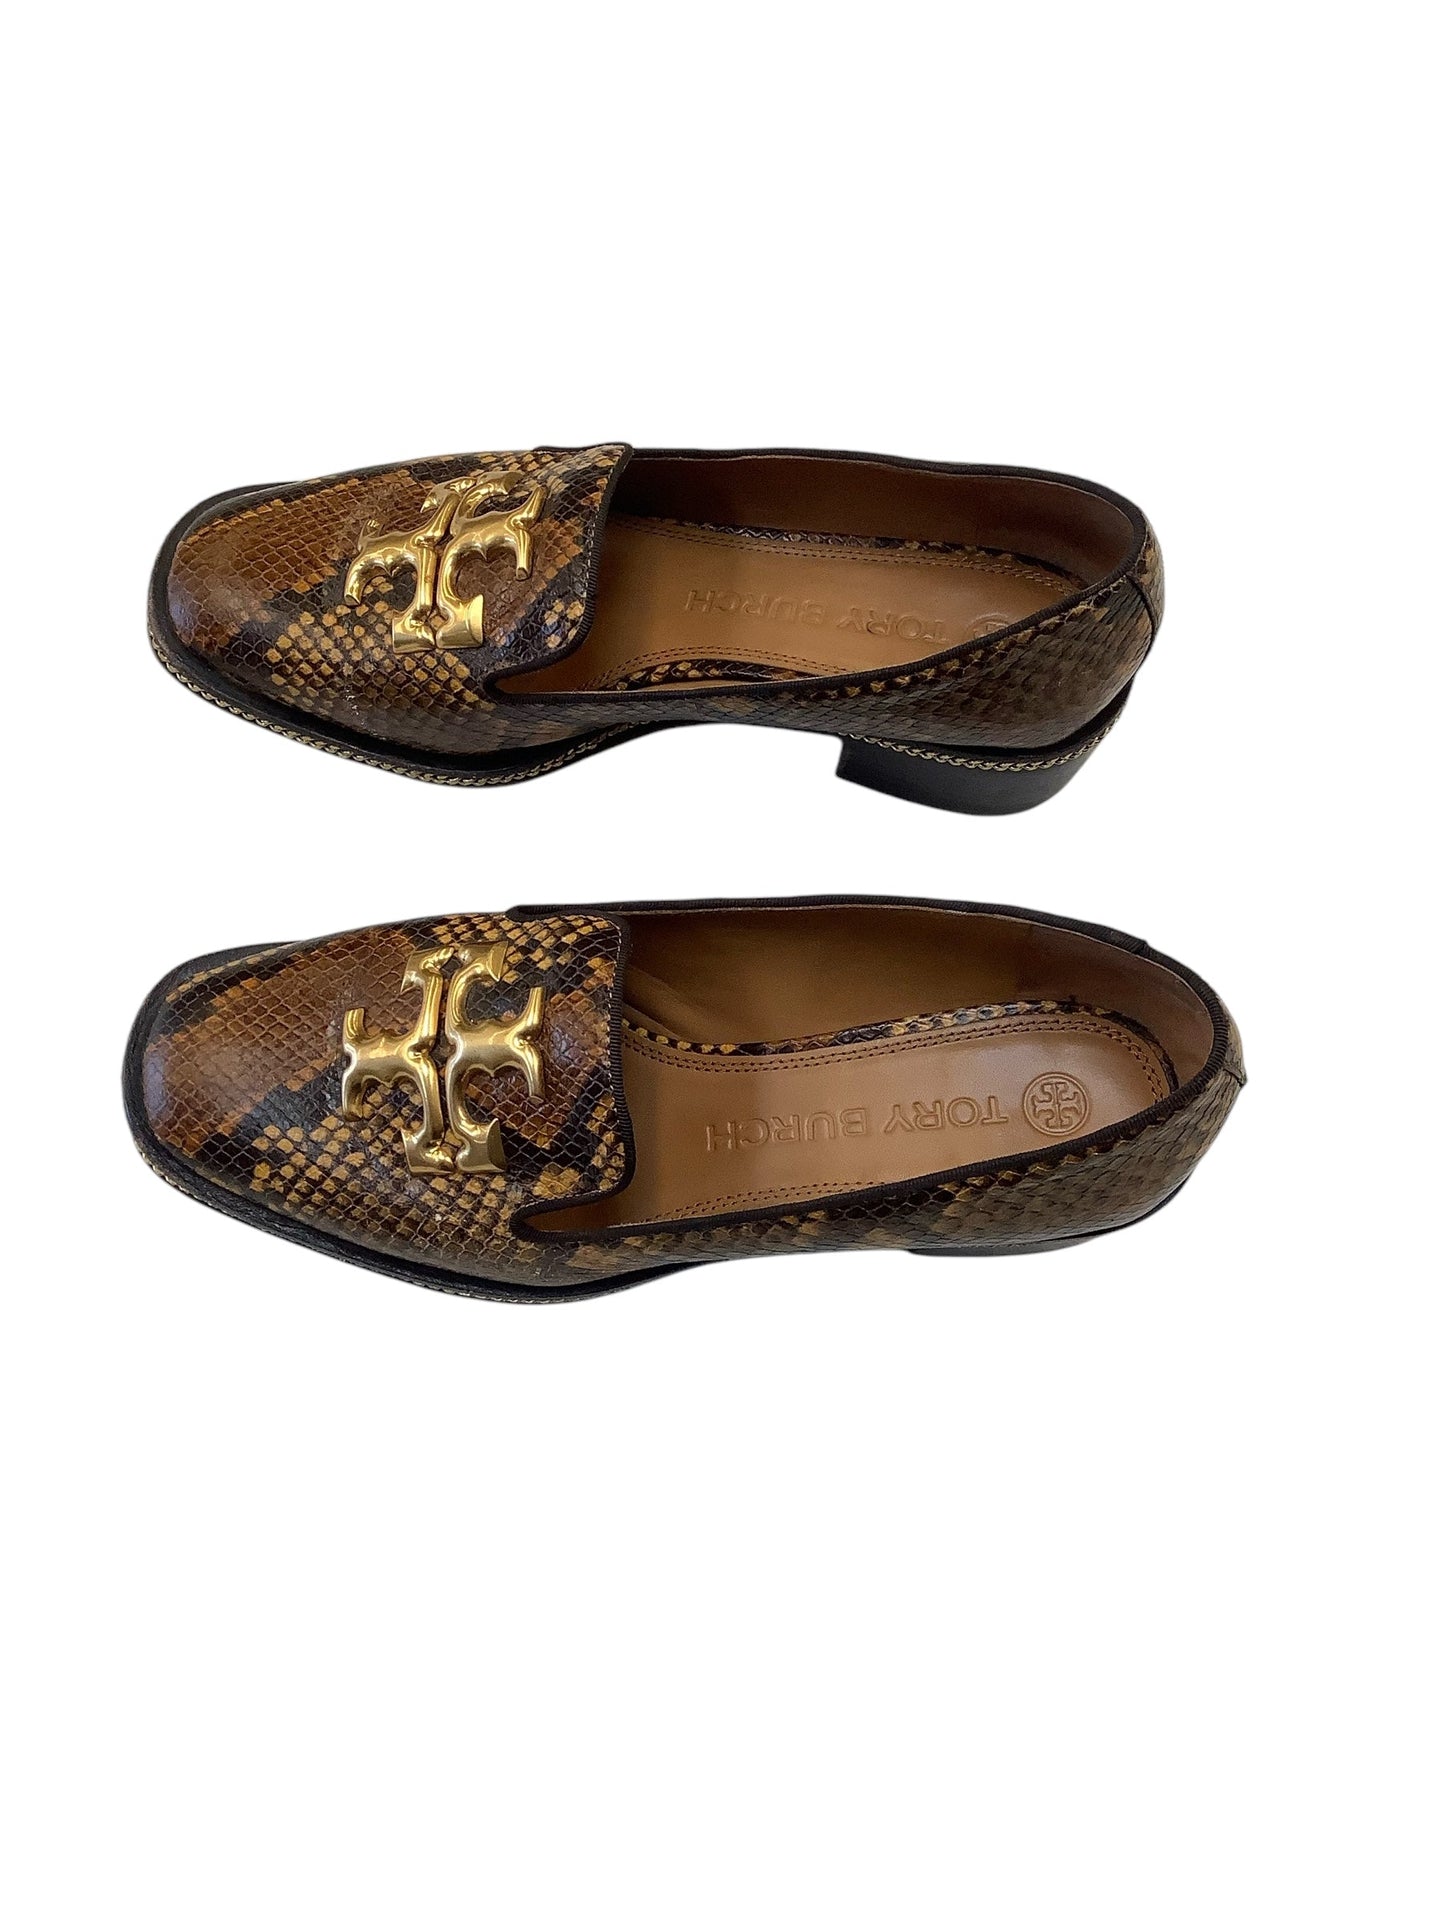 Shoes Designer By Tory Burch  Size: 8.5